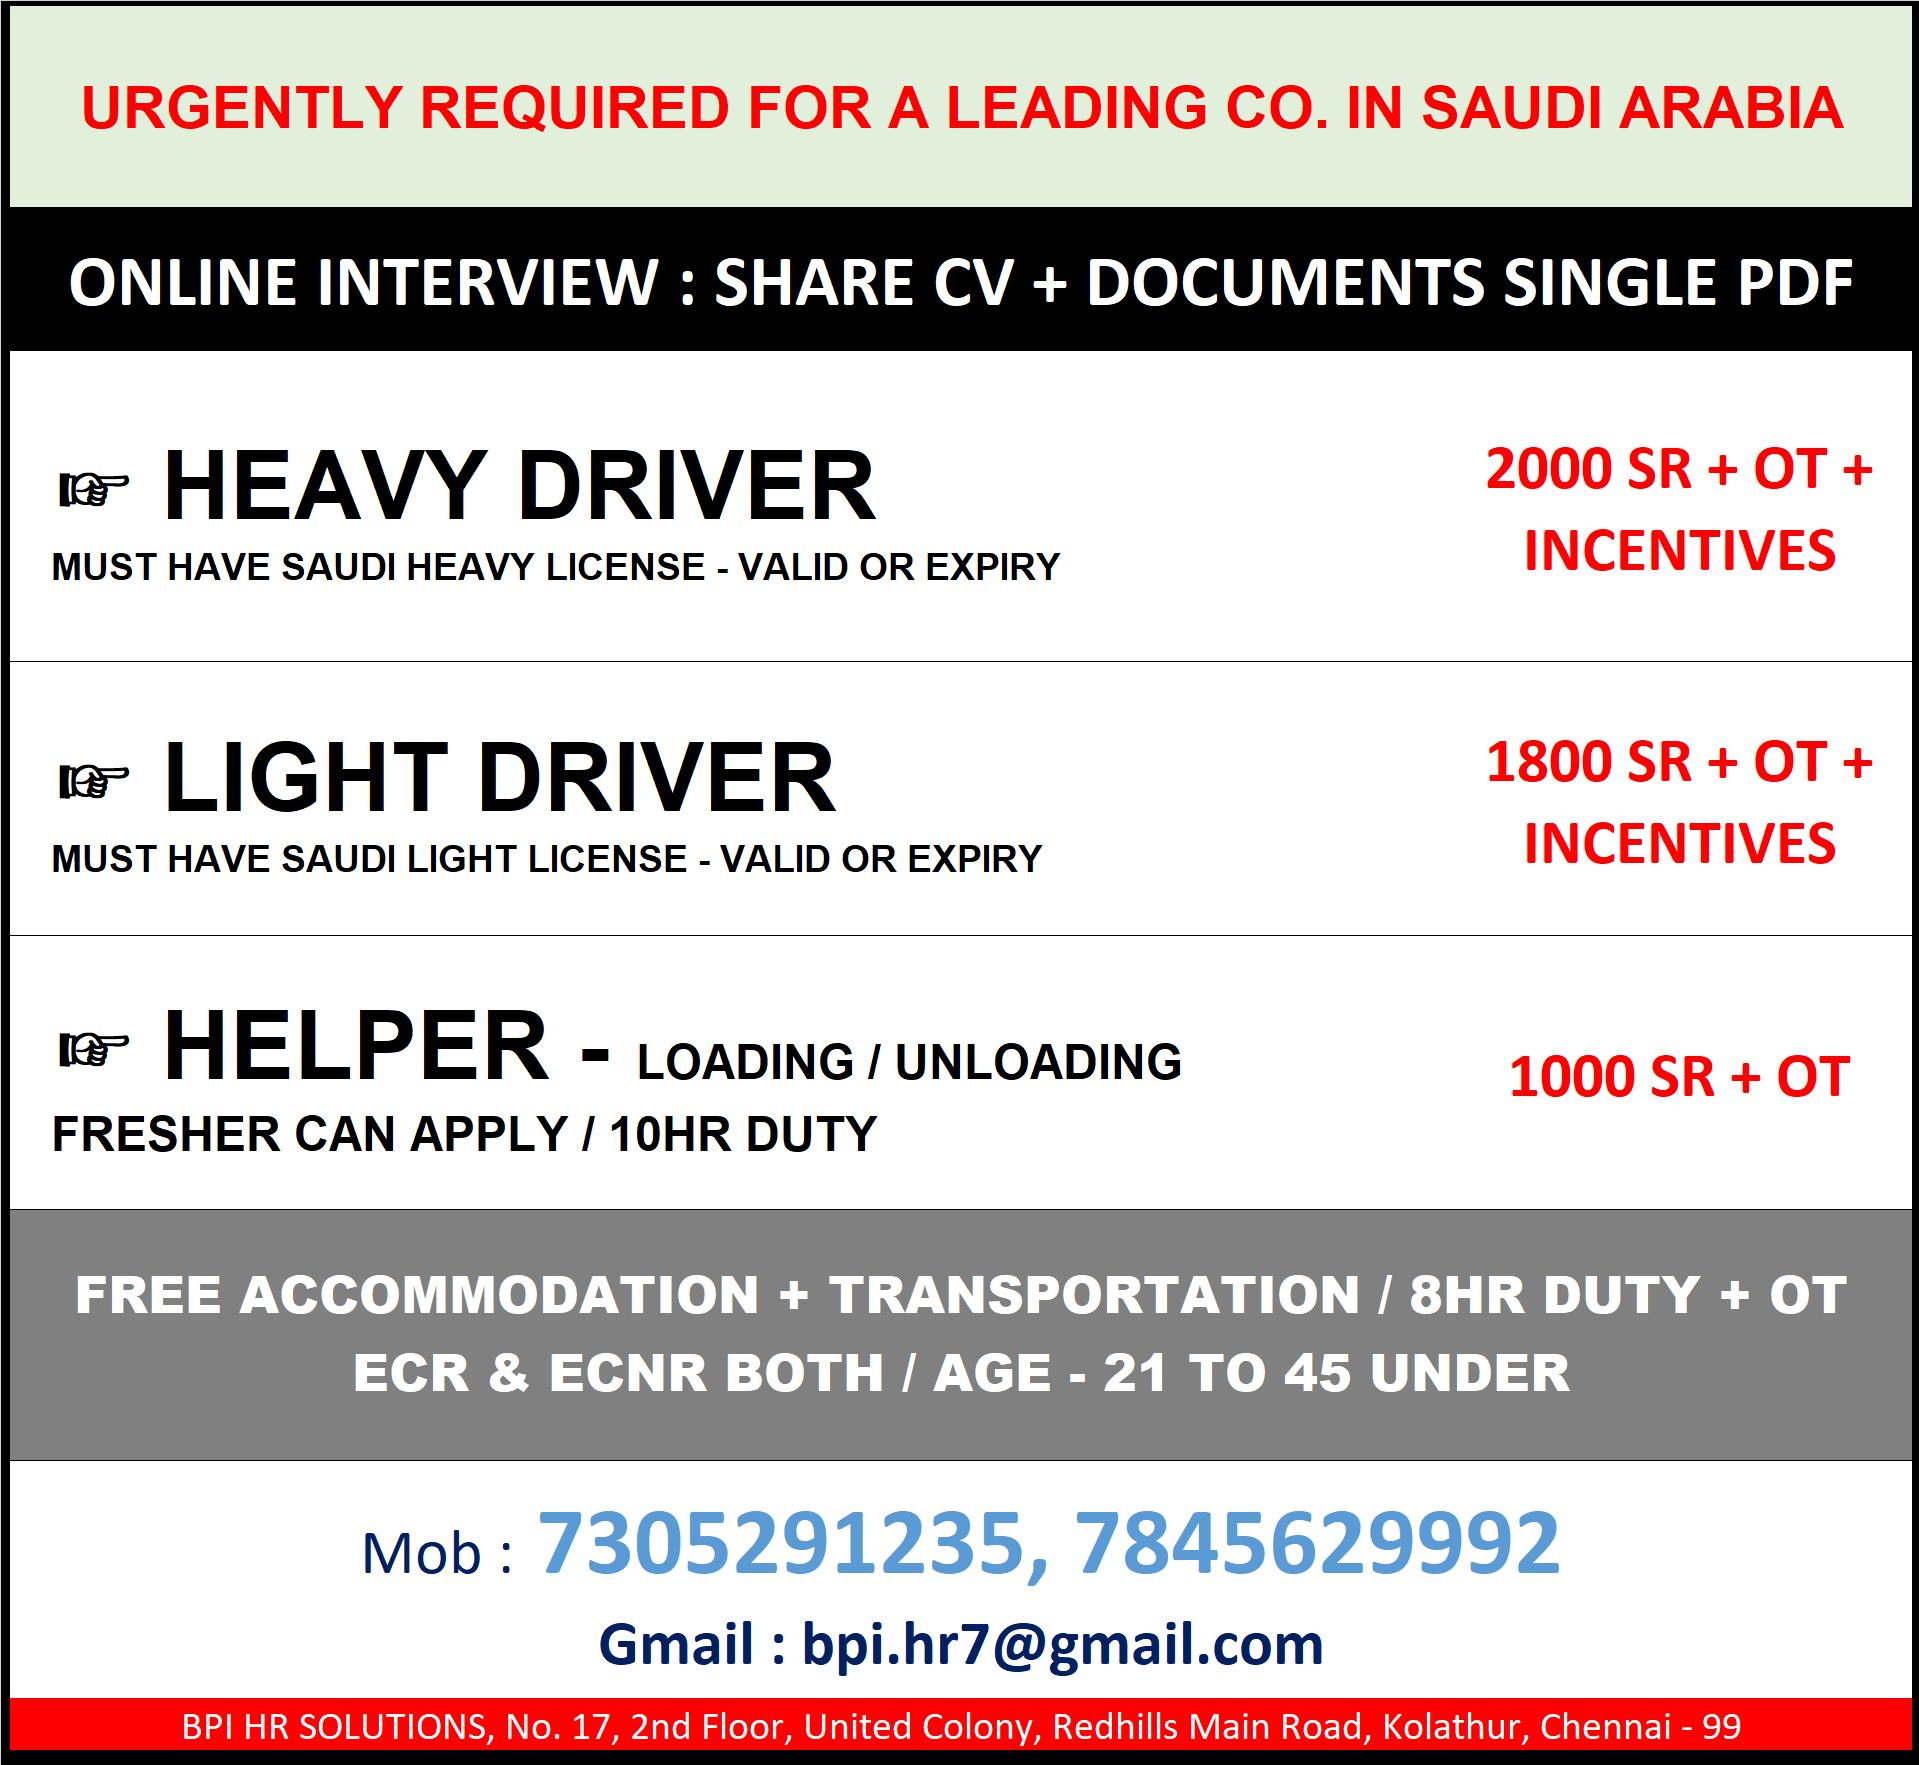 urgently required for a leading co. in ksa